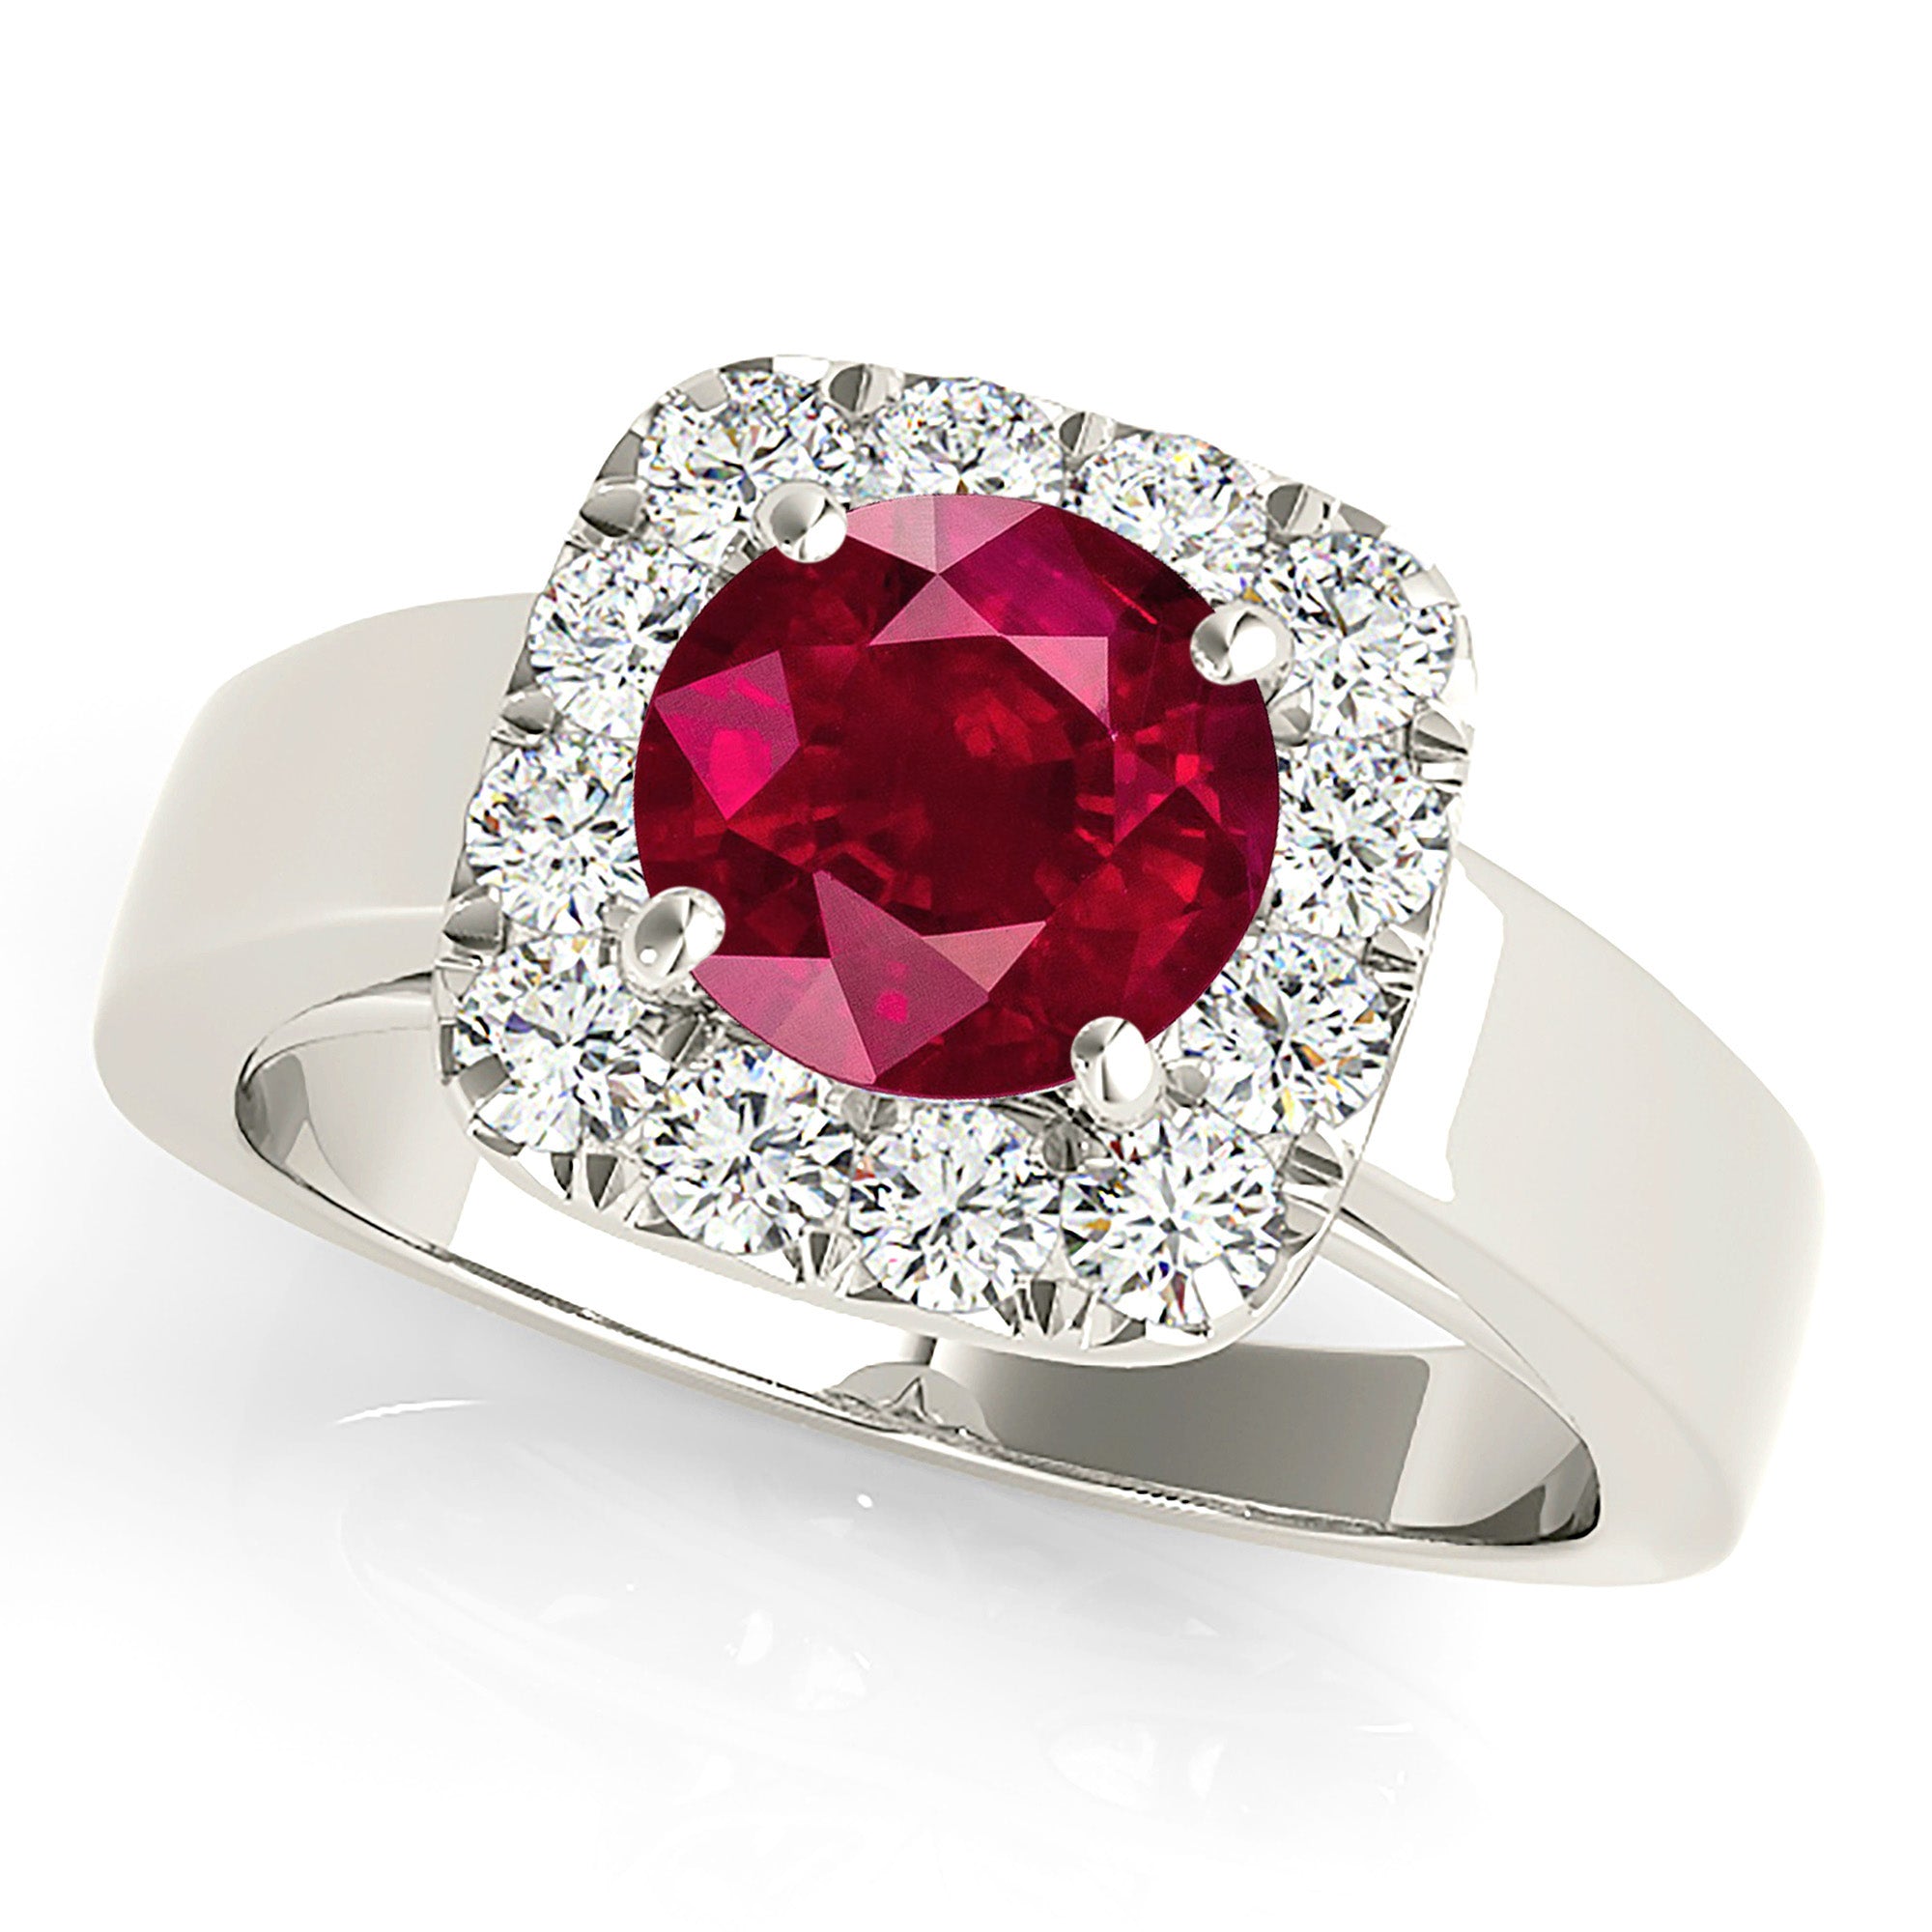 2.35 ct. Genuine Ruby Ring With 0.50 ctw. Diamond Cushion Halo and Solid Gold Solitaire Band-in 14K/18K White, Yellow, Rose Gold and Platinum - Christmas Jewelry Gift -VIRABYANI